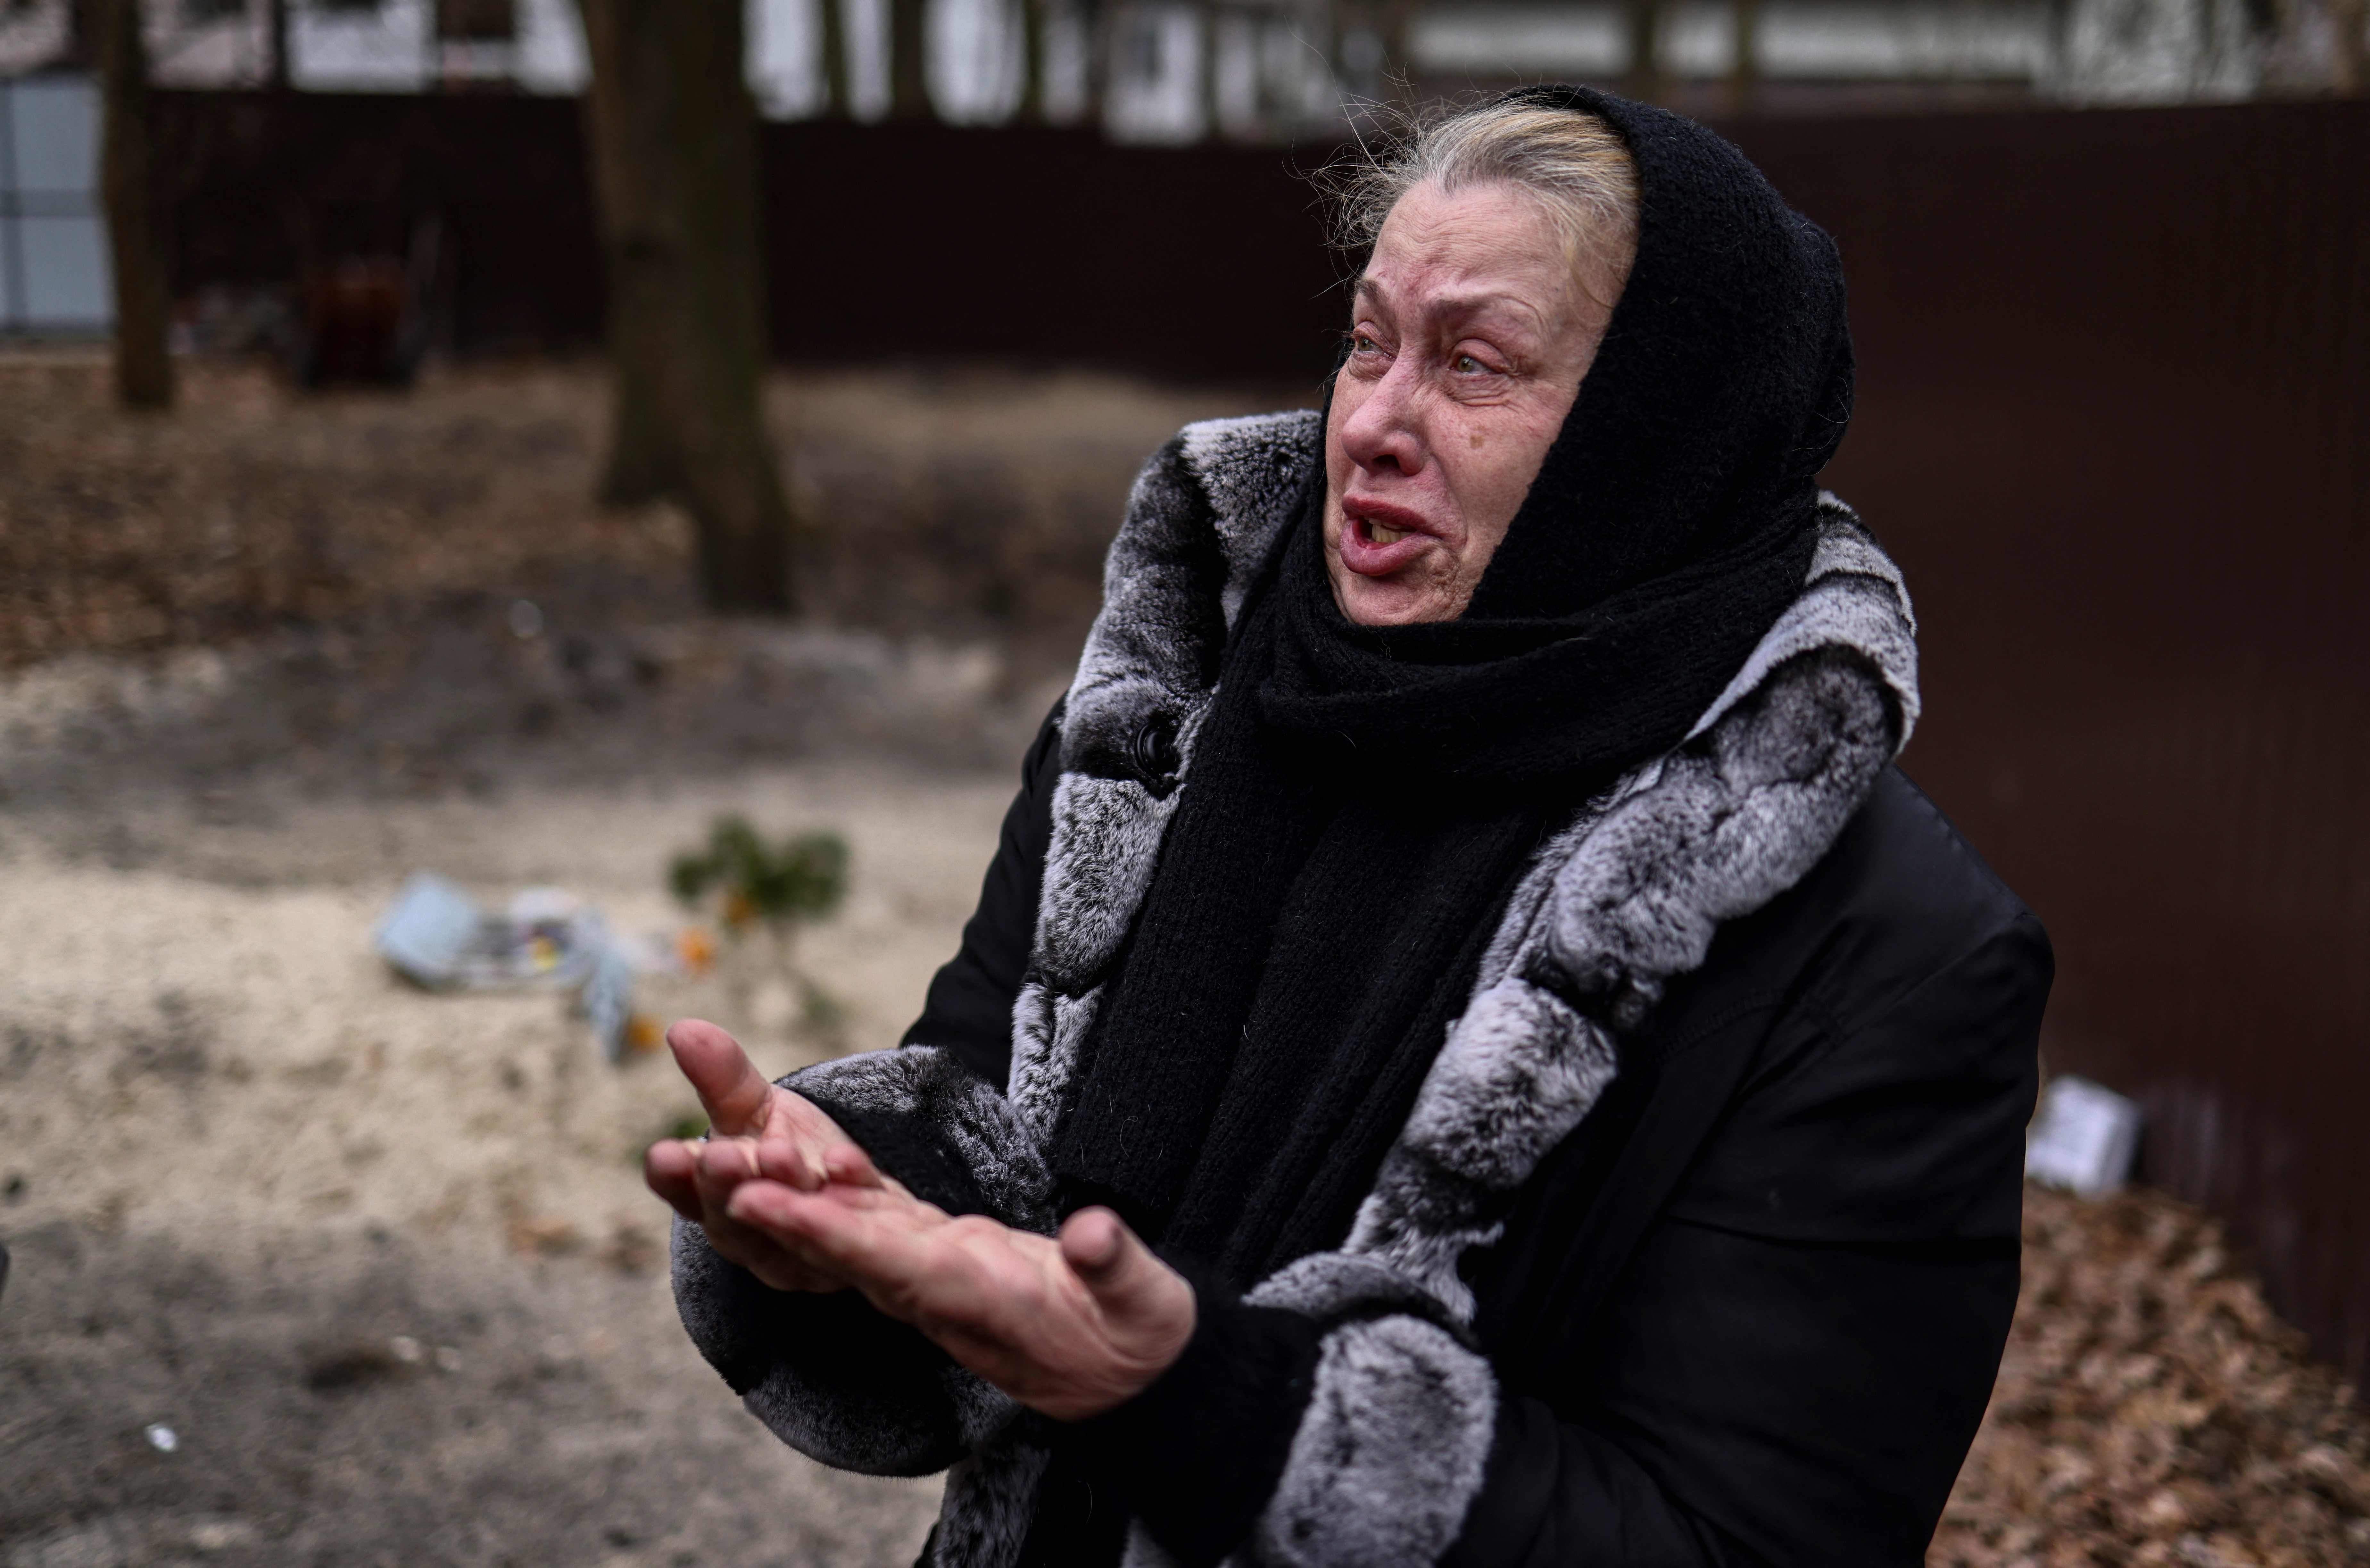 Bucha resident Tetiana Ustymenko weeps over the grave of her son, buried in the garden of her house